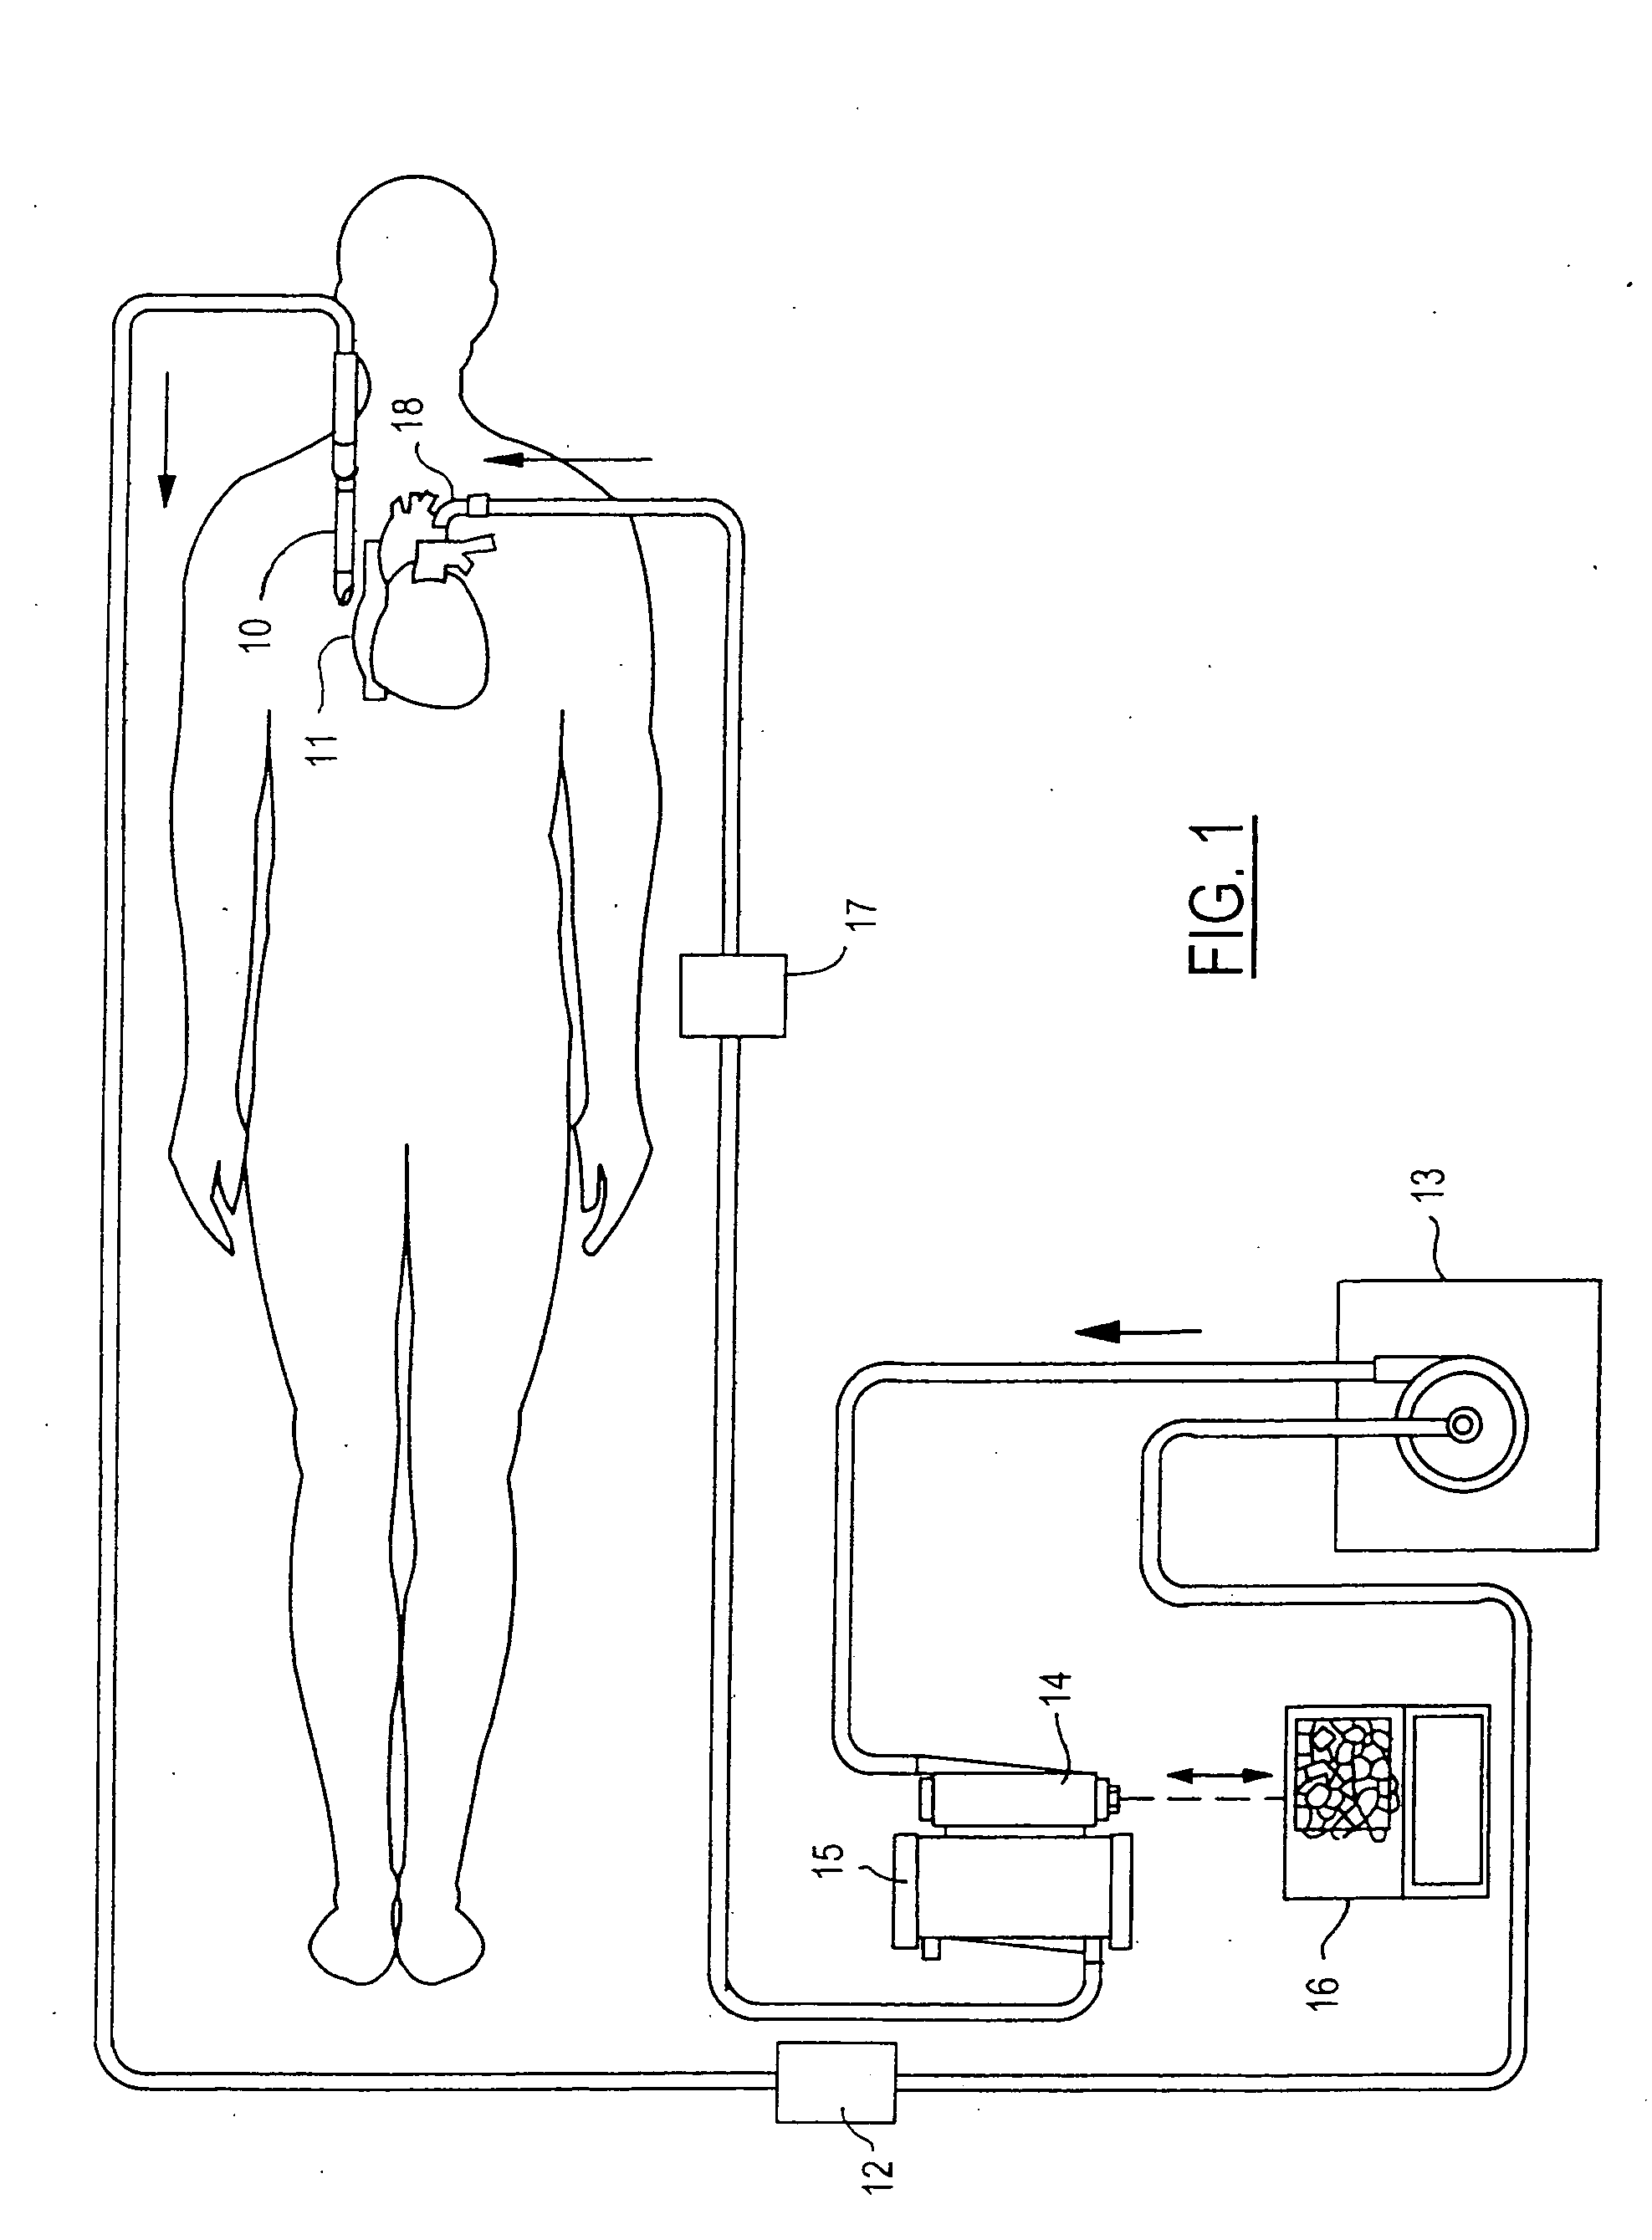 Float-driven lever arm for blood perfusion air removal device